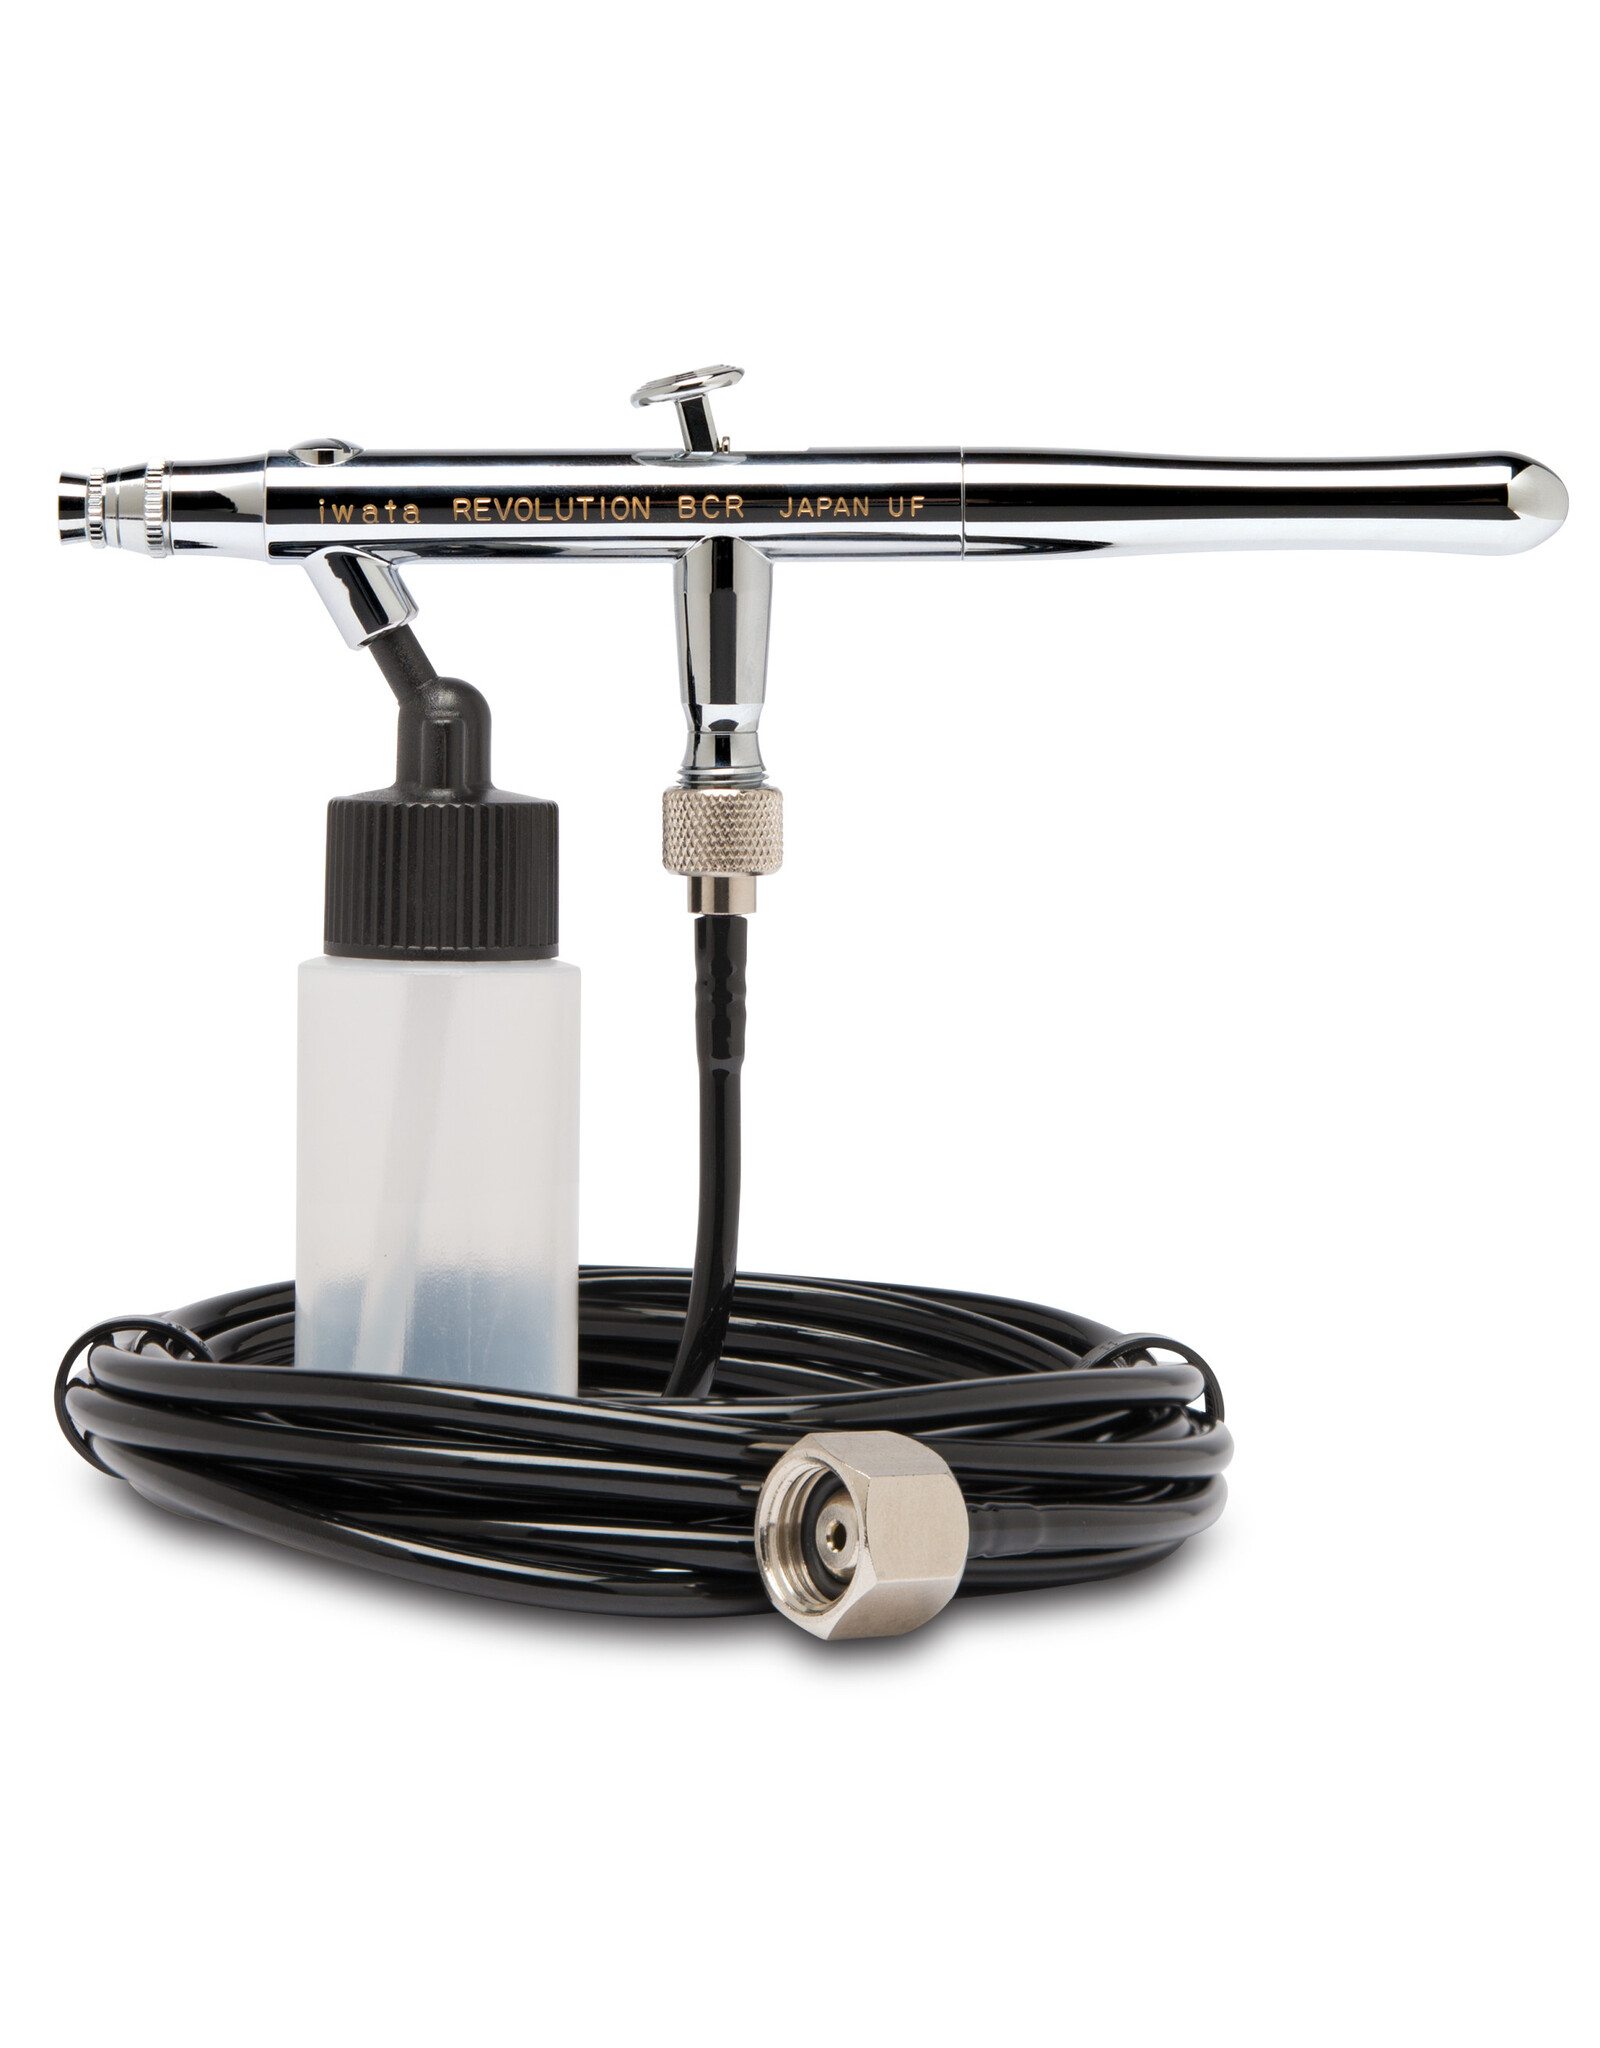 Medea Iwata Revolution HP-BCR Siphon Feed Dual Action Airbrush with Iwata Airbrush Hose